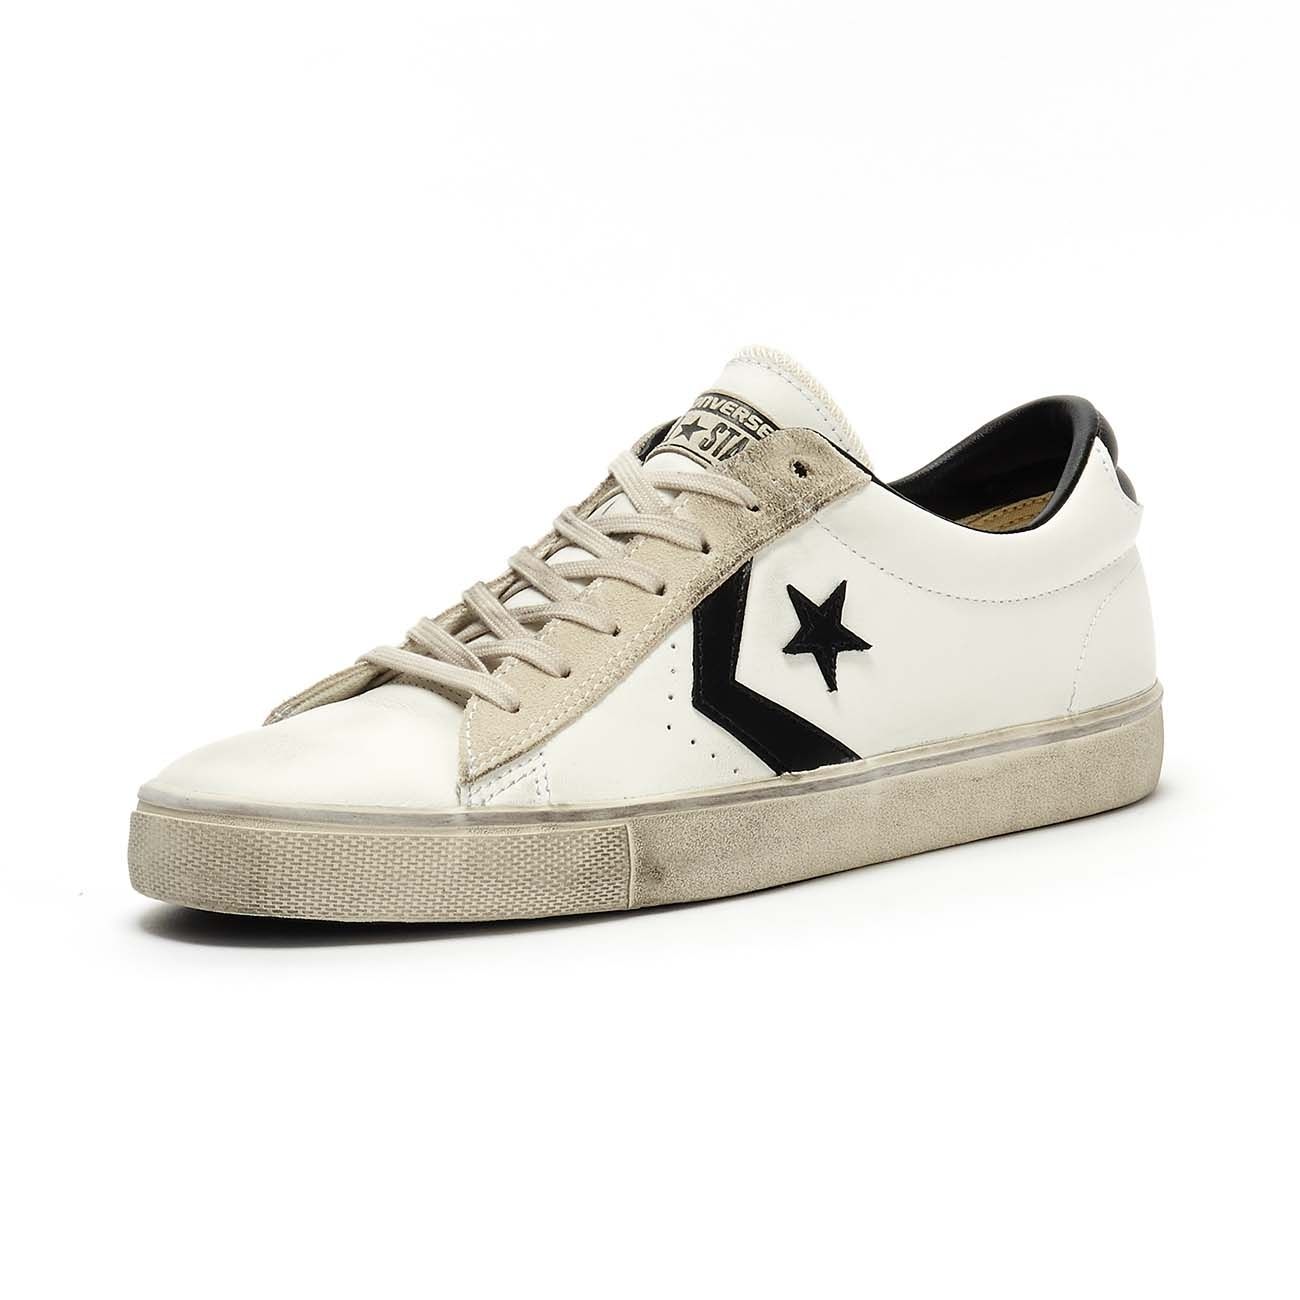 CONVERSE SNEAKERS PRO LEATHER VULC DISTRESSED OX Men White ... خصل شعر رمادي